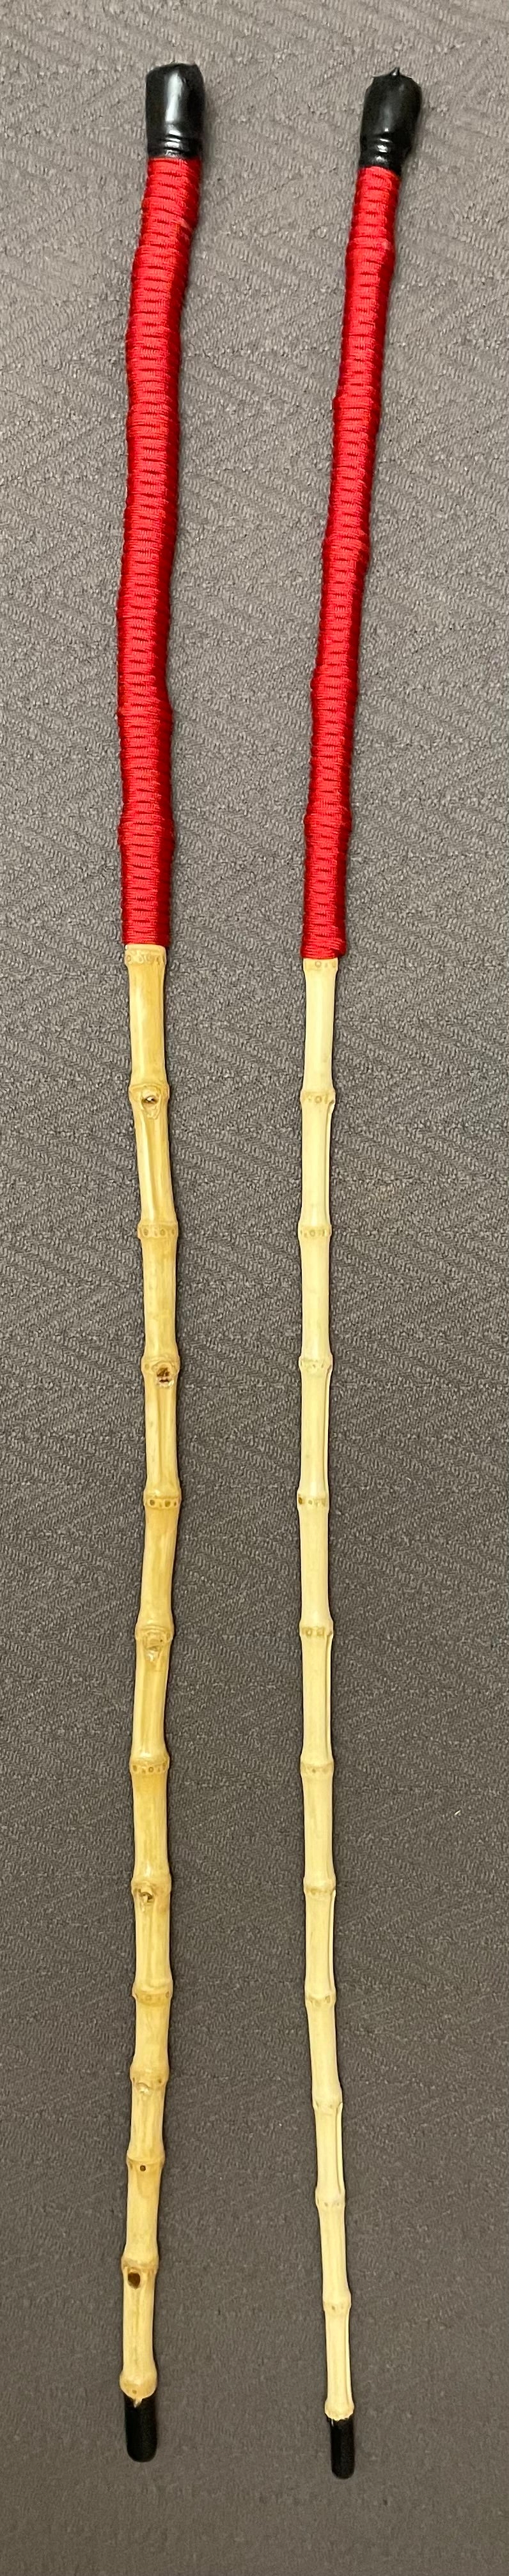 Whangee Canes / Punishment Canes with Paracord Handles